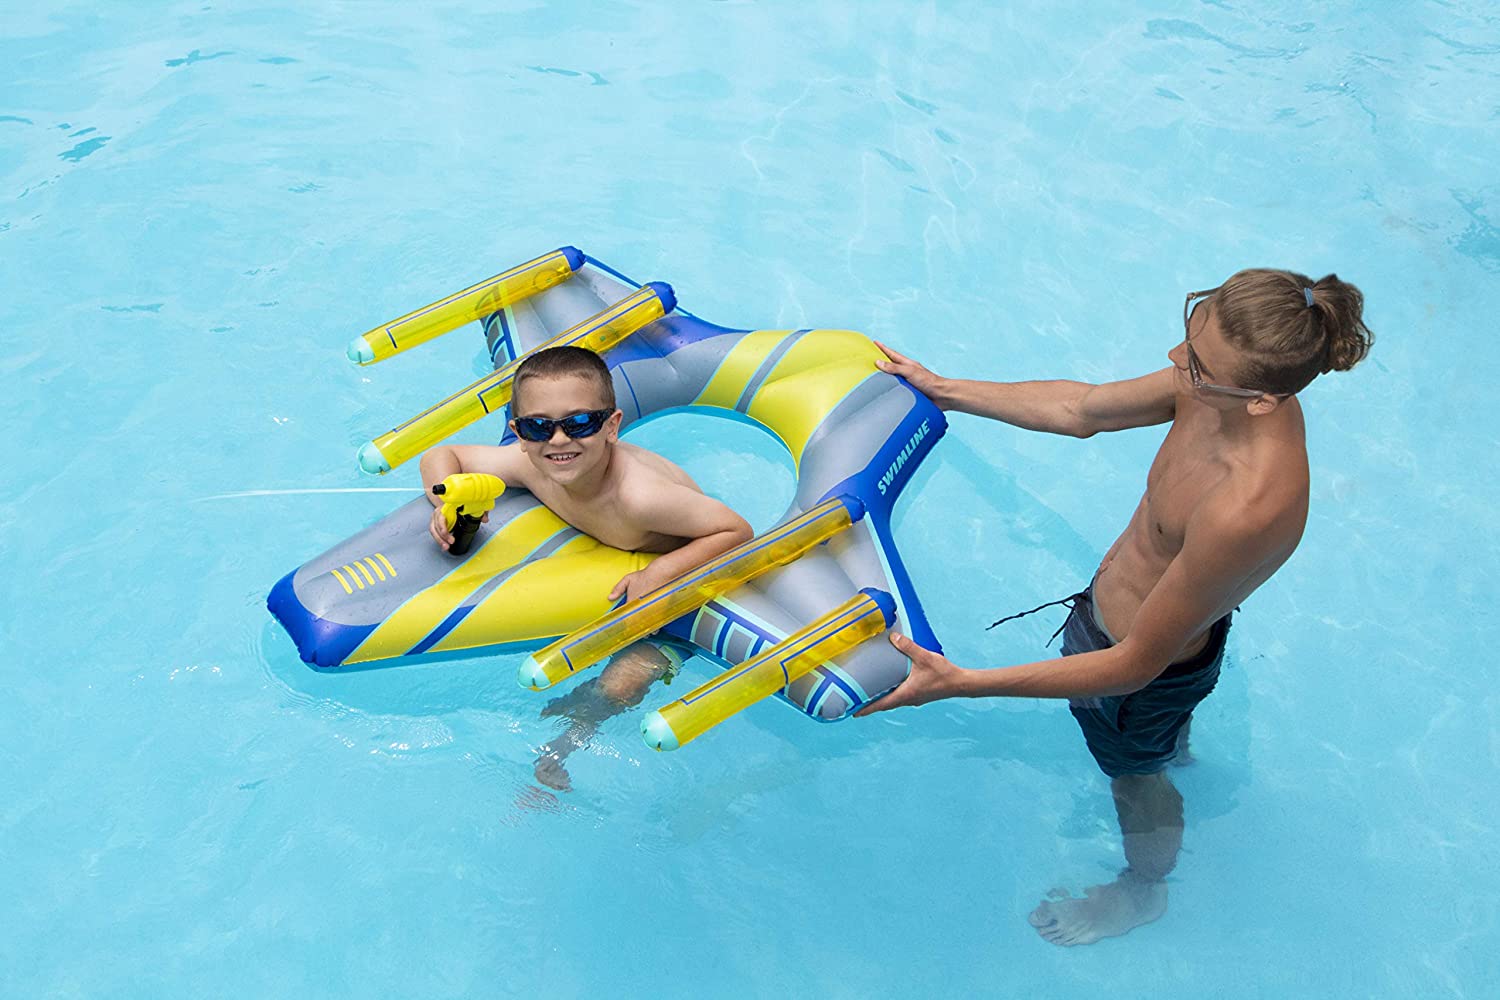 Details about   Unomor Giant Pool Floats for Kids with Built in Squirt Gun and Pirate Ship Des 